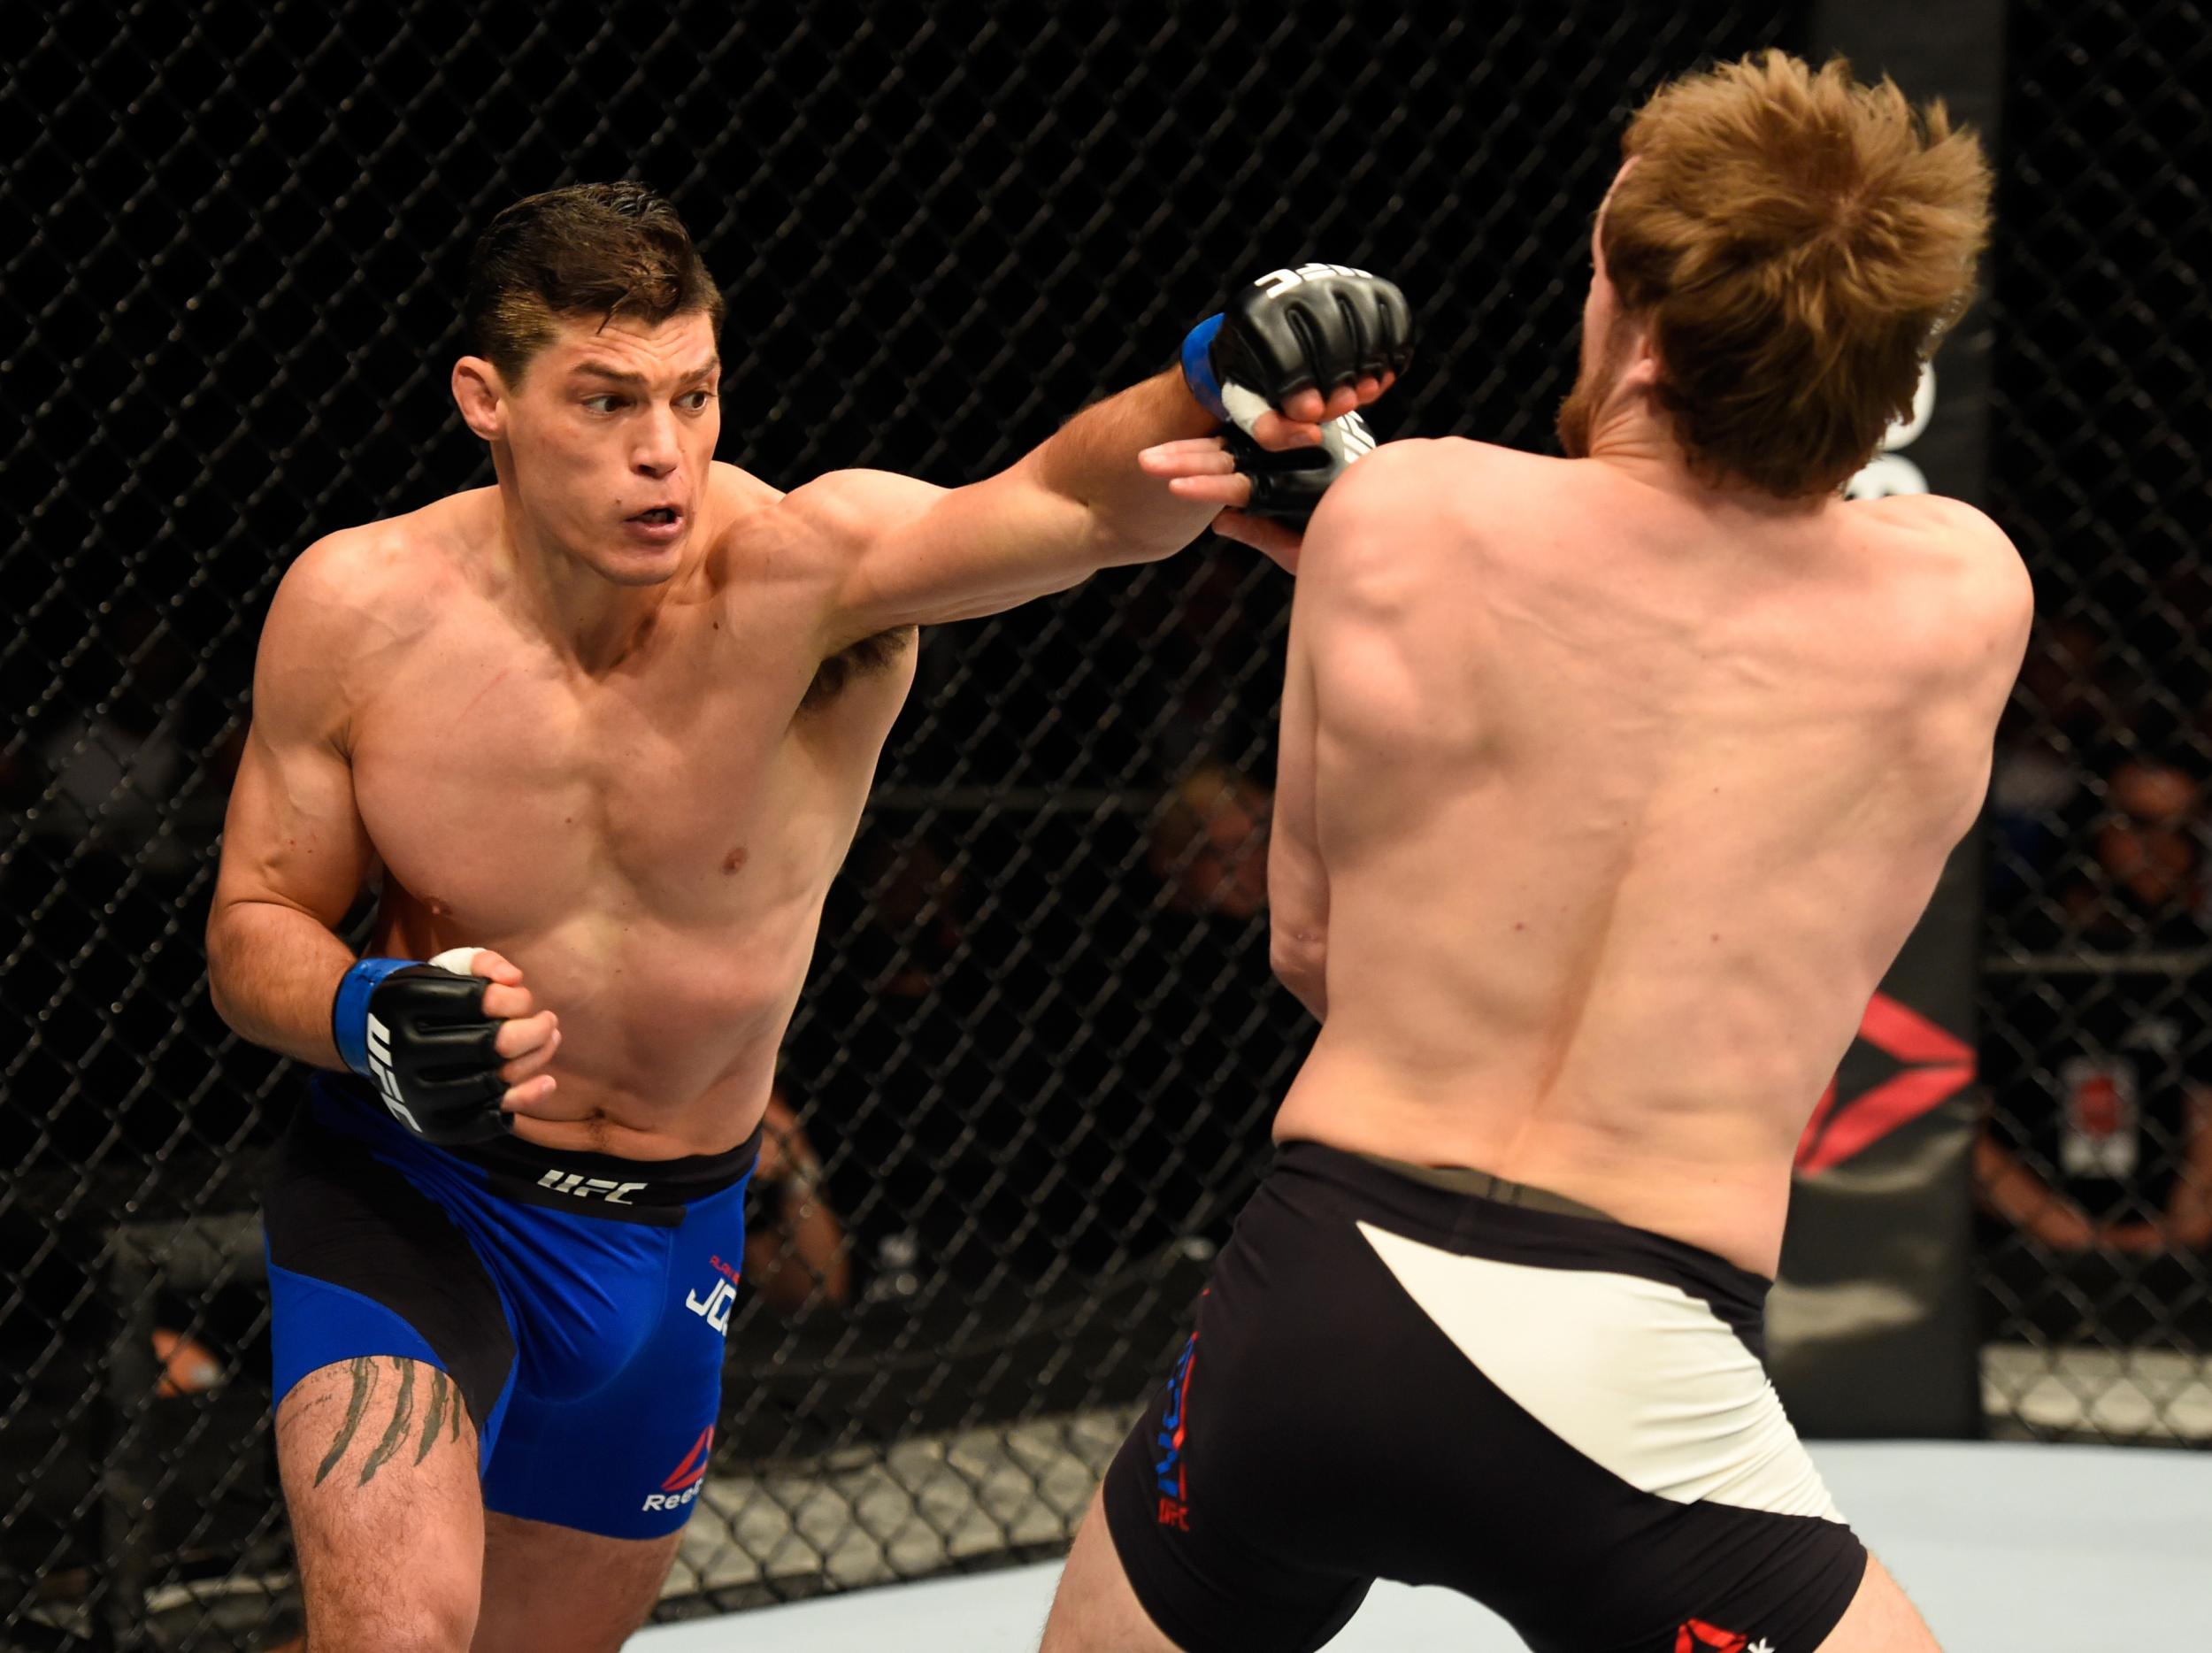 Jouban returns to the Octagon after a submission loss to Gunnar Nelson at UFC London